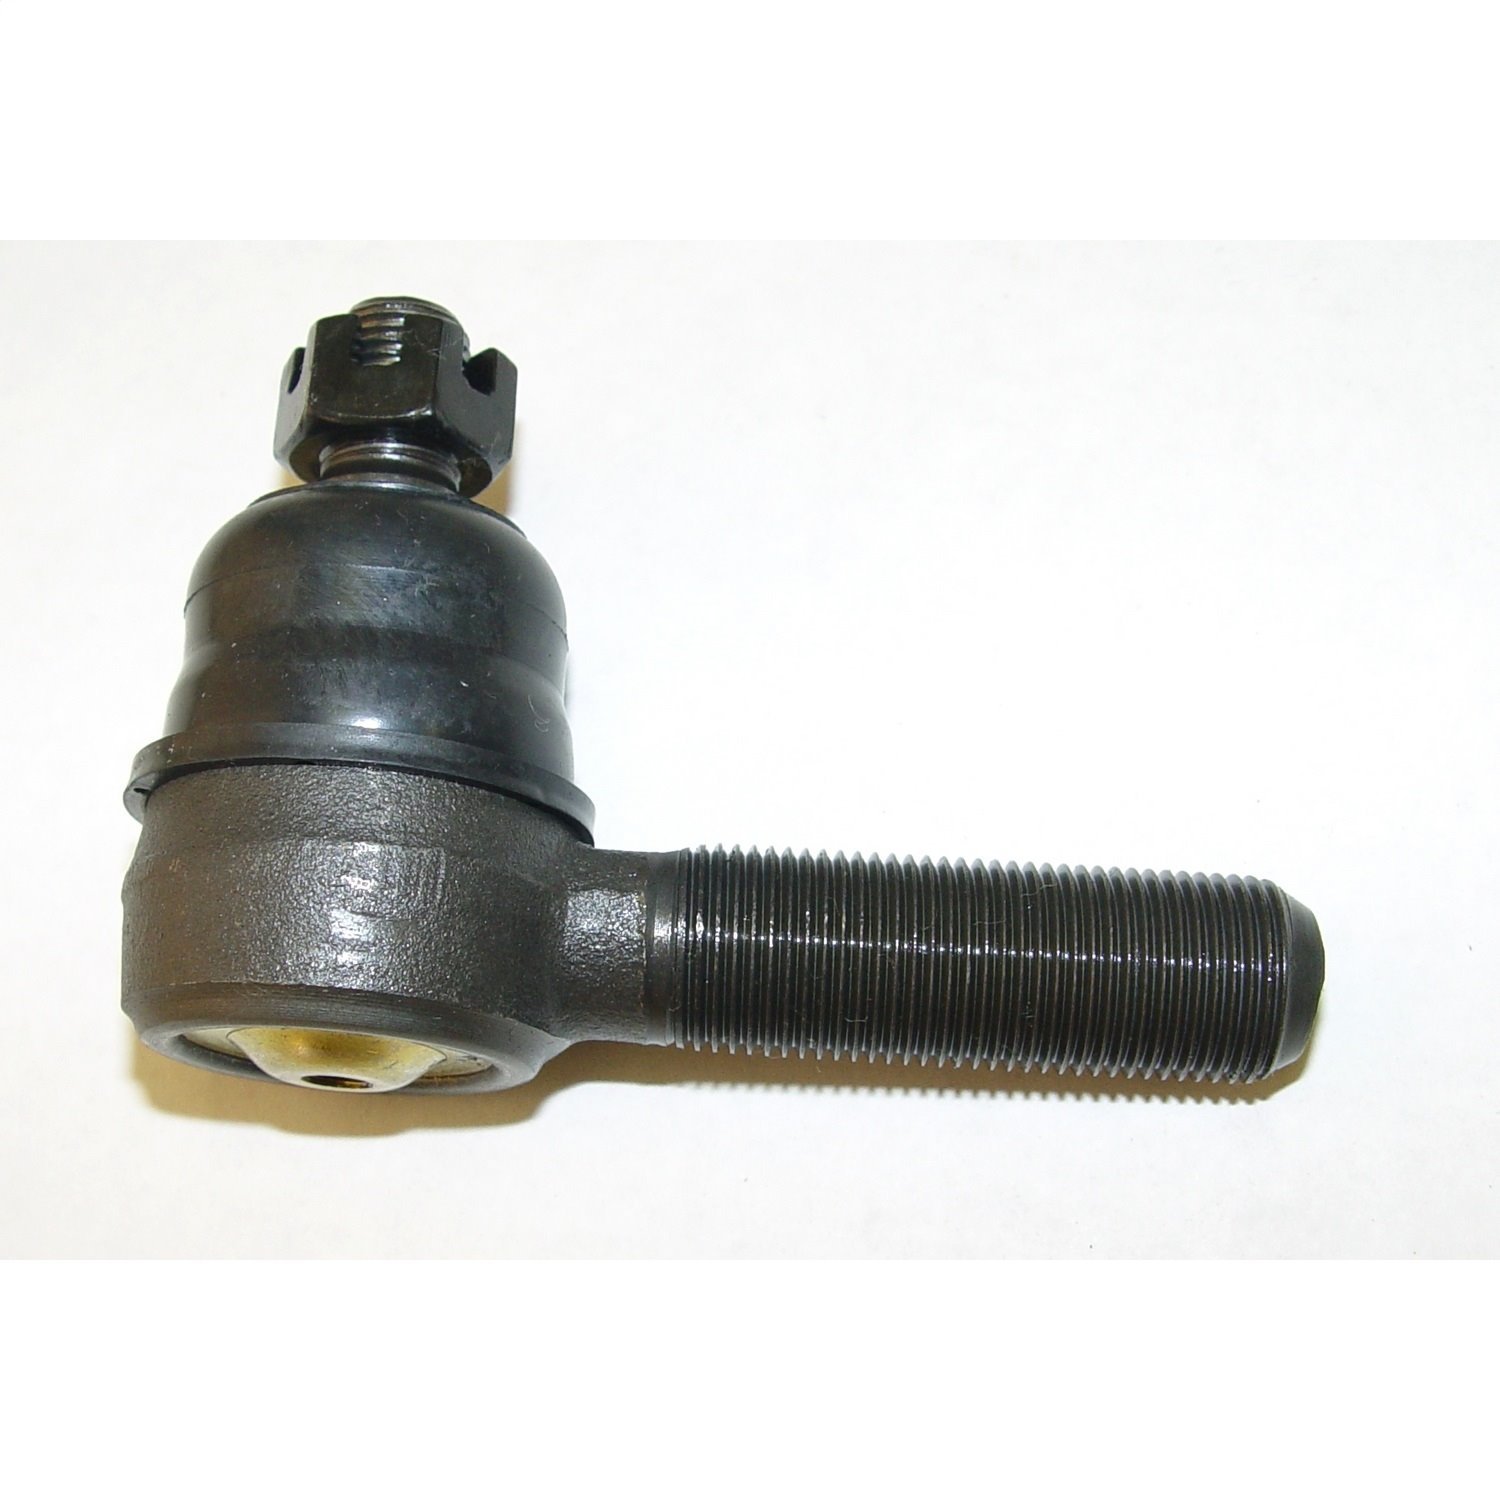 OE-style replacement tie rod end with right hand thread from Omix-ADA, Fits 41-86 Willys and Jeep CJ models